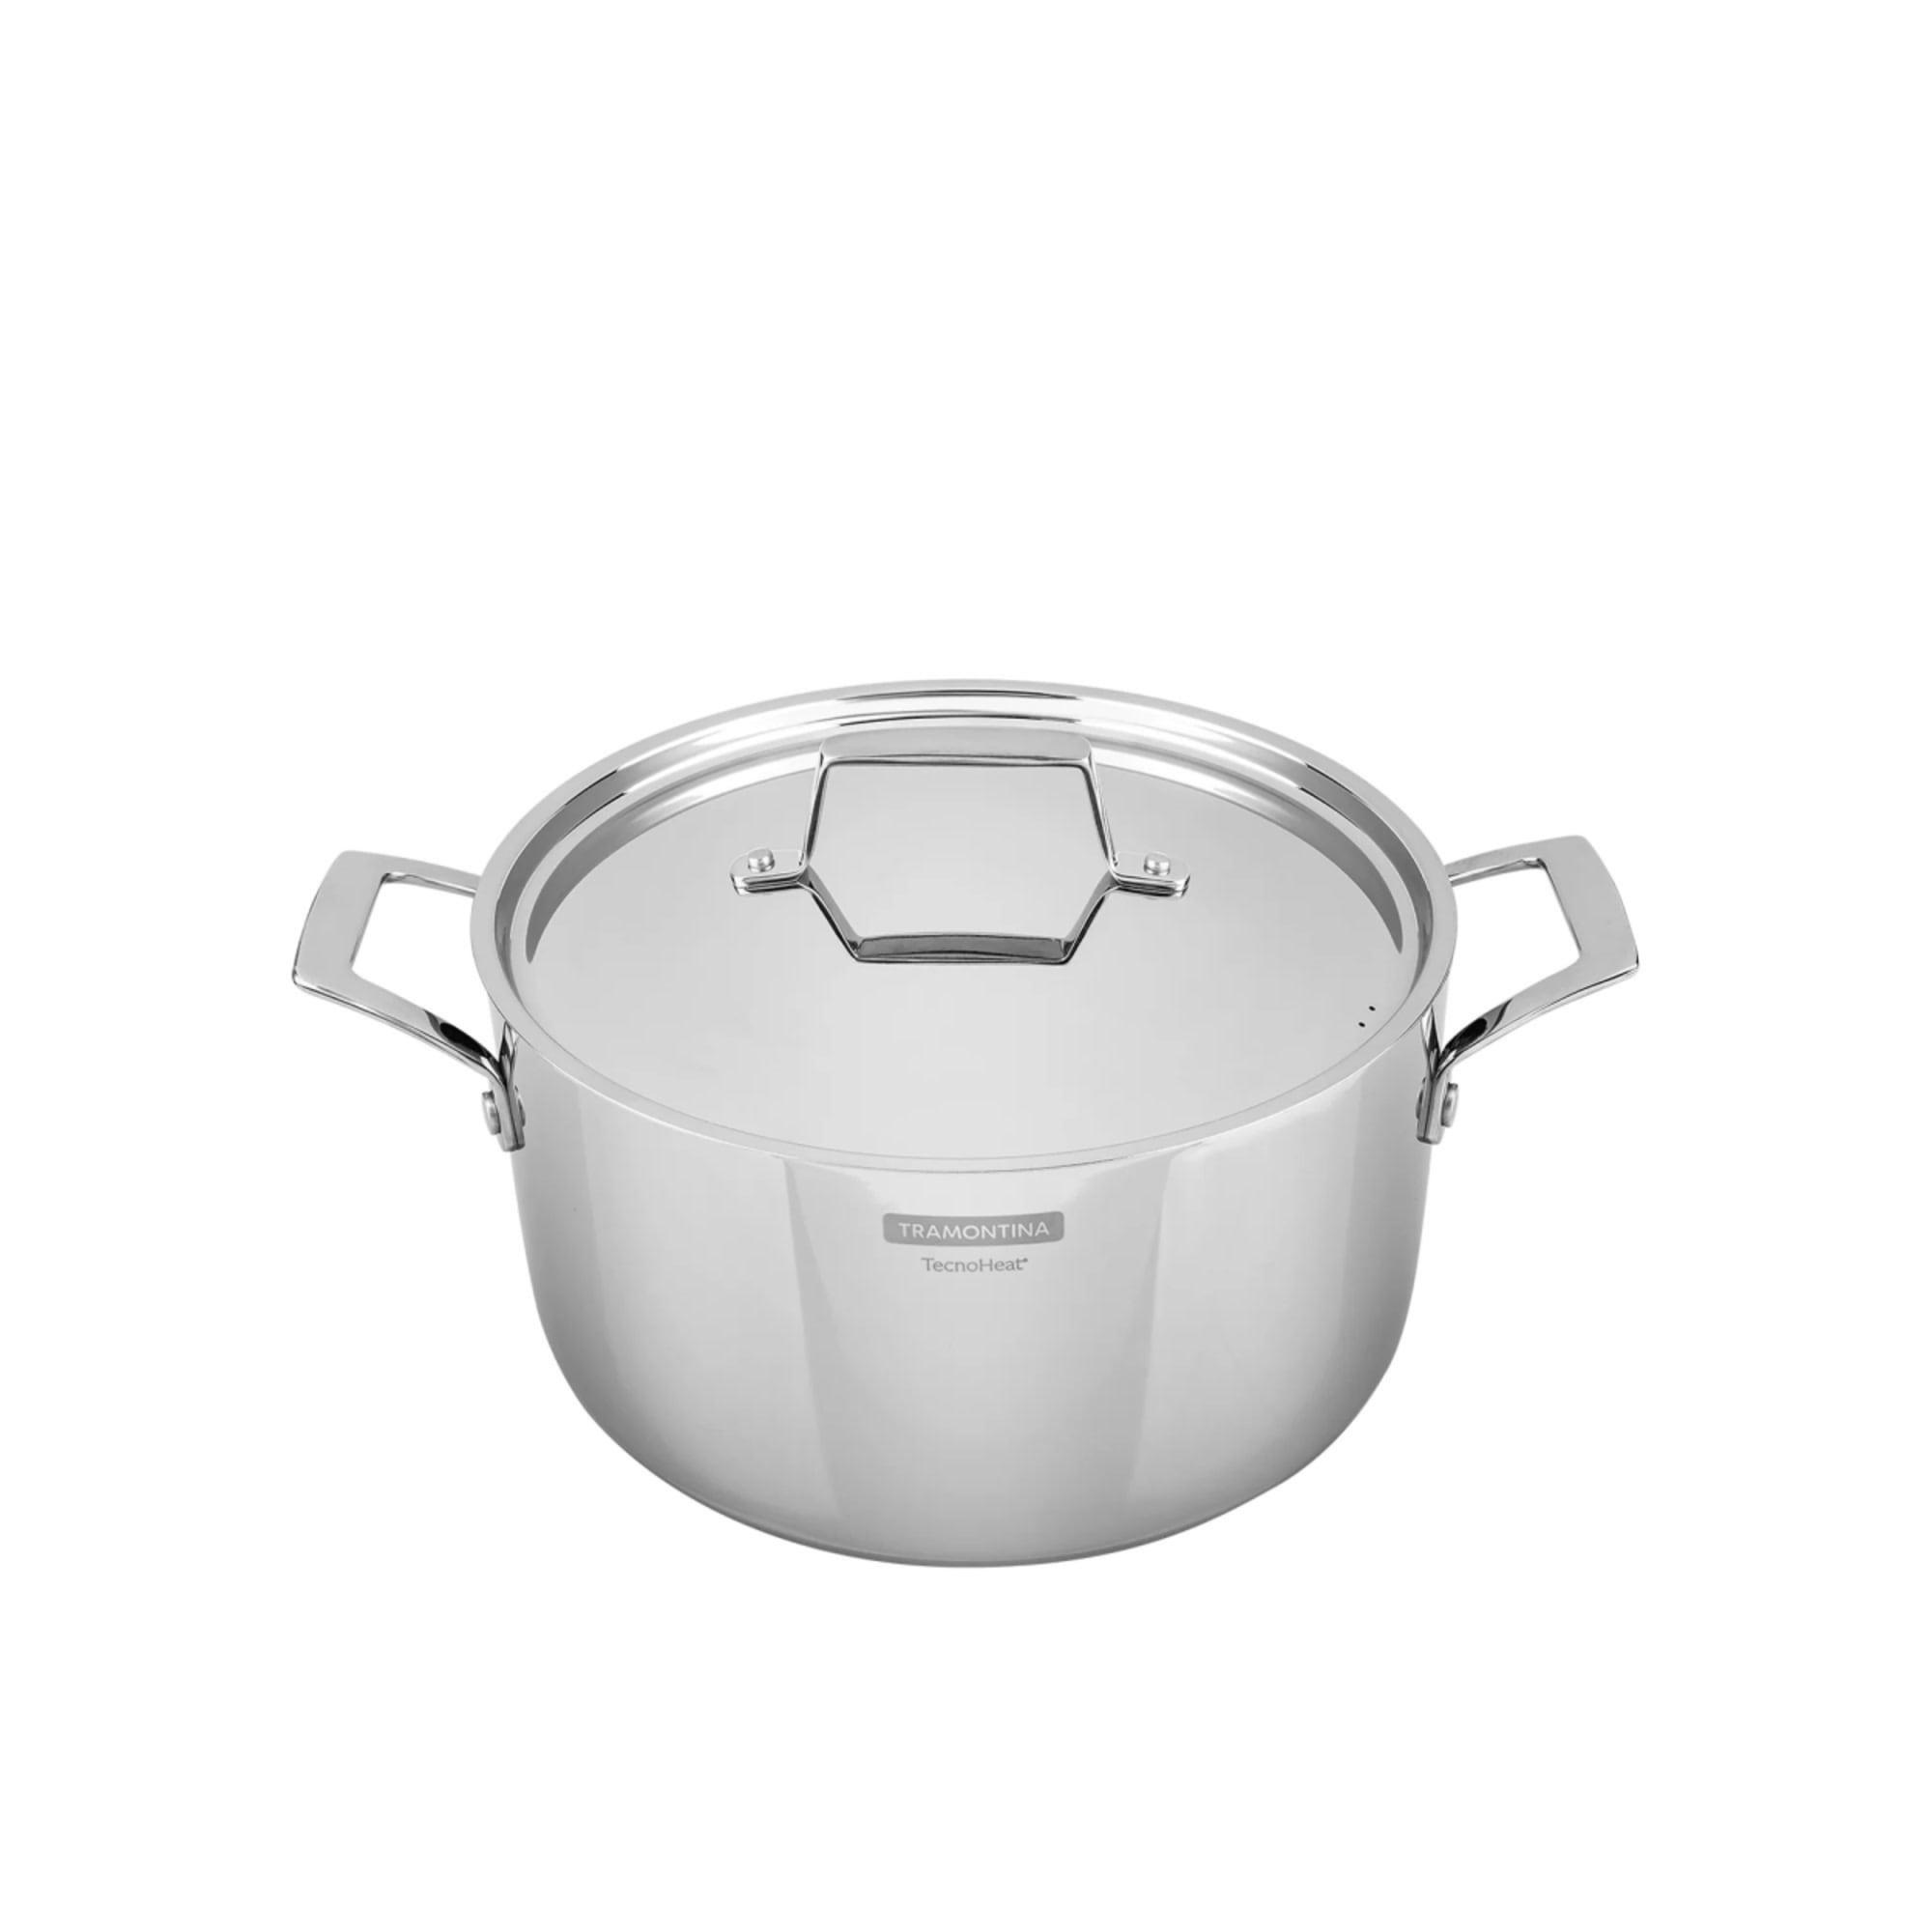 Tramontina Grano Collection Stainless Steel Deep Casserole 20cm - 3.5L Image 4